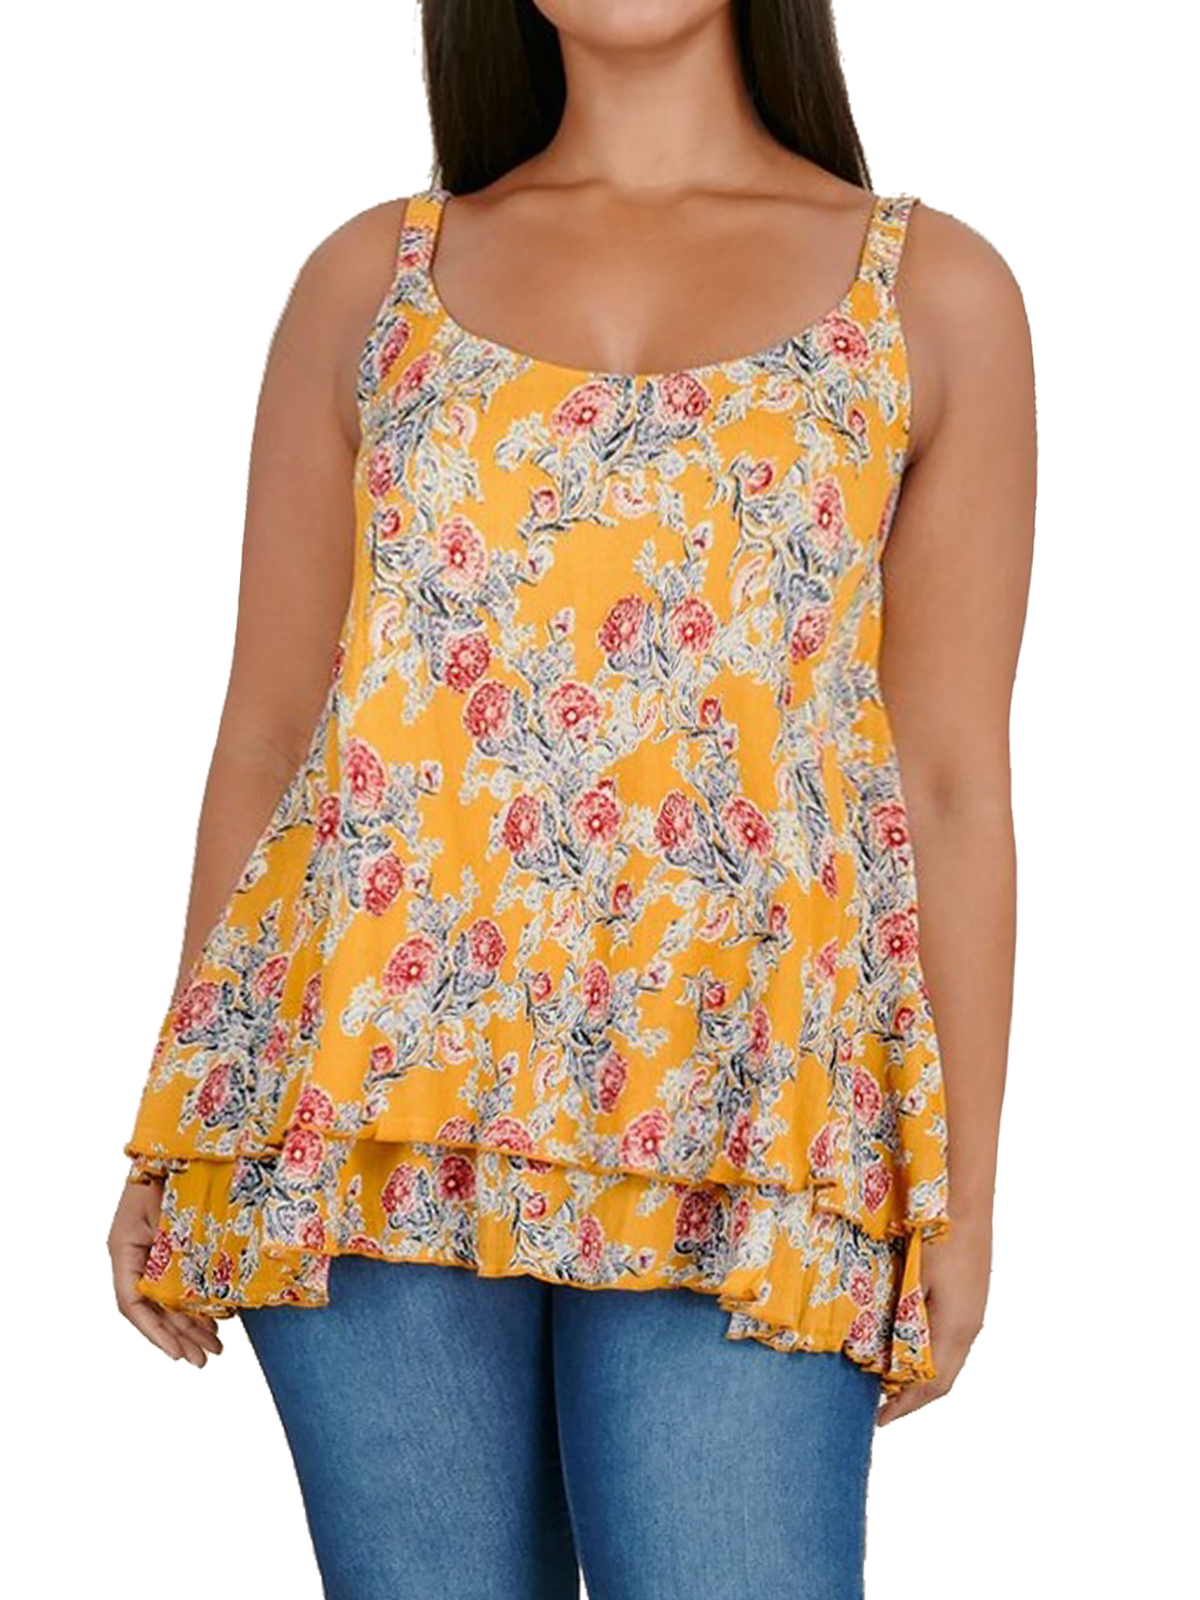 3VANS YELLOW Floral Print Cami Top - Plus Size 14 to 30